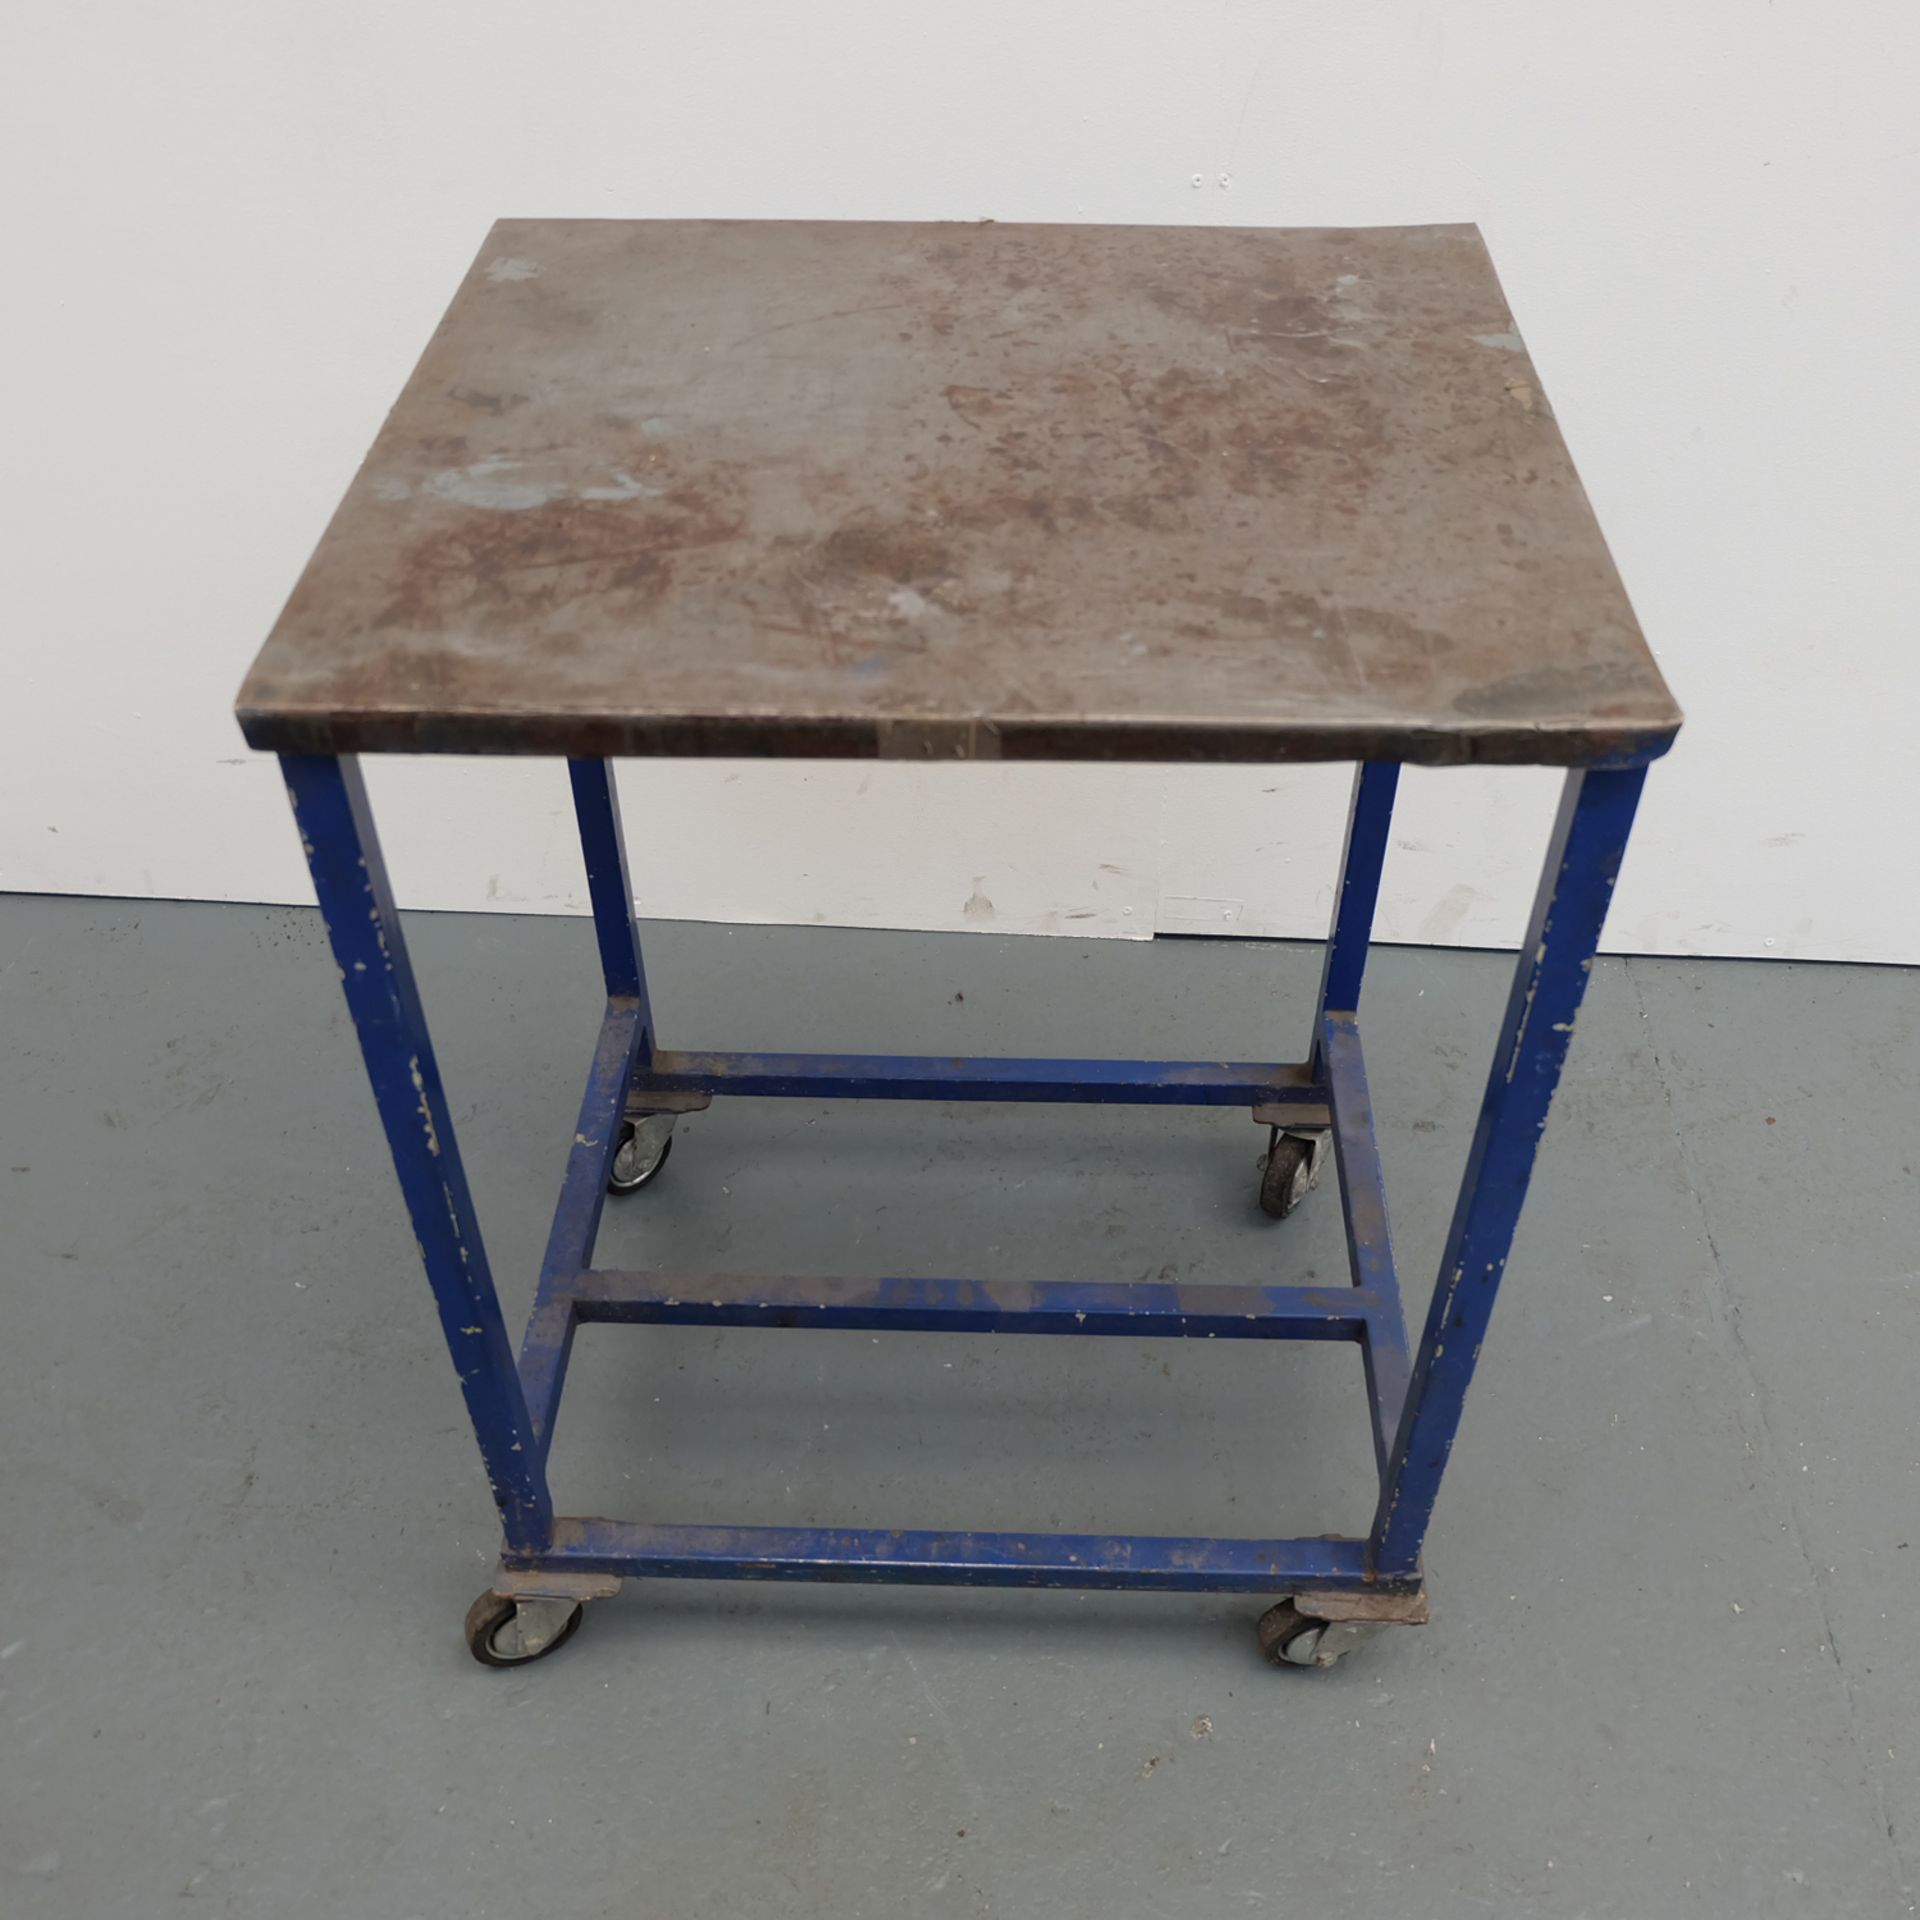 Mobile Steel Trolley on Castors. Approx Dimensions560mm x 490mm x 770mm High. - Image 2 of 3